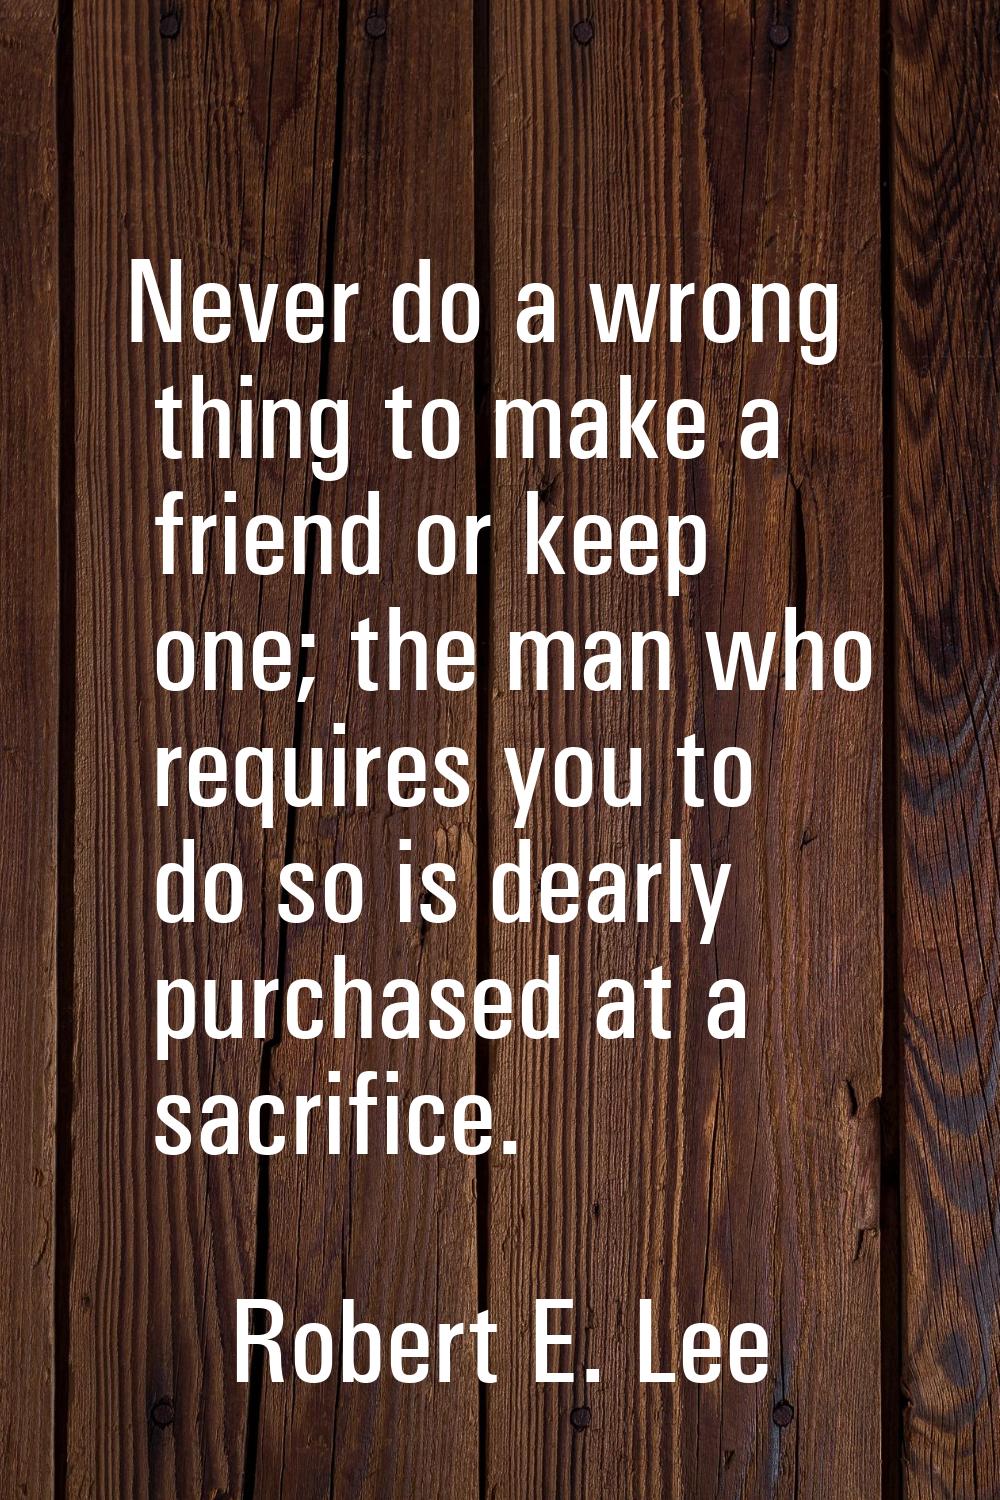 Never do a wrong thing to make a friend or keep one; the man who requires you to do so is dearly pu